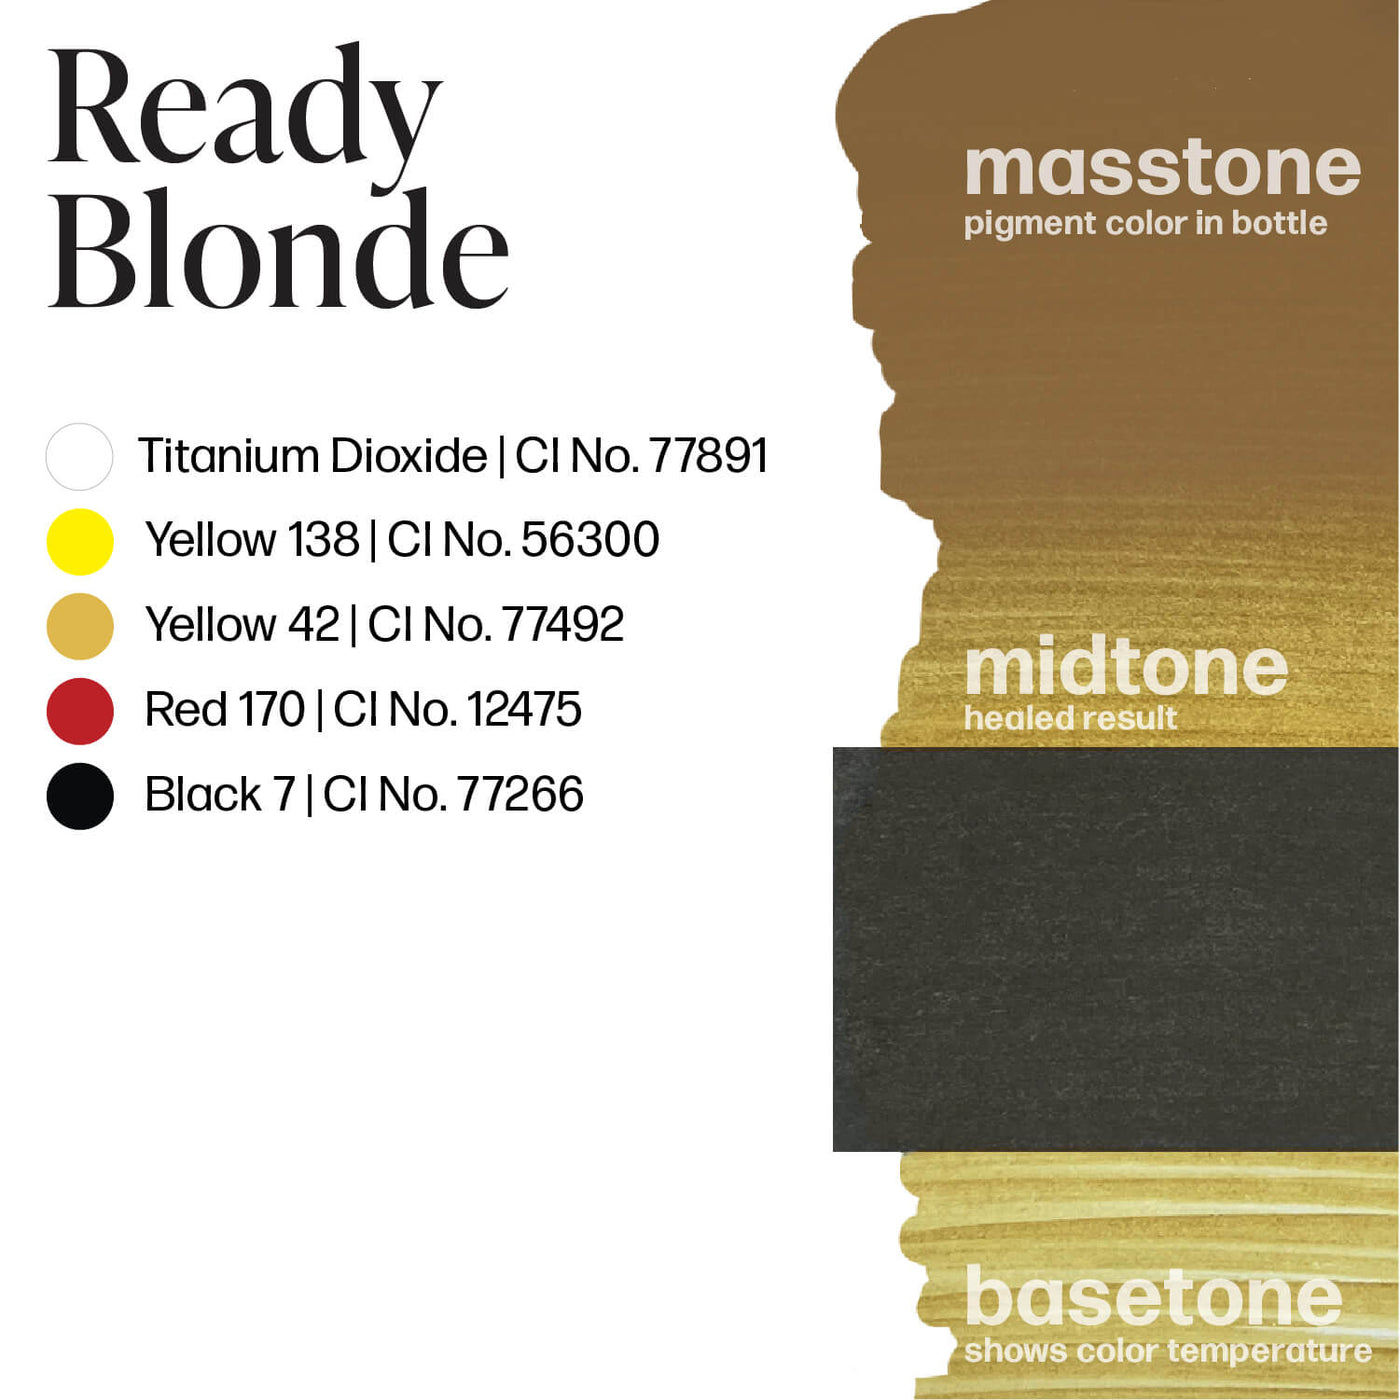 Perma Blend Luxe Ready Blonde - PMU Pigments - Mithra Tattoo Supplies Canada